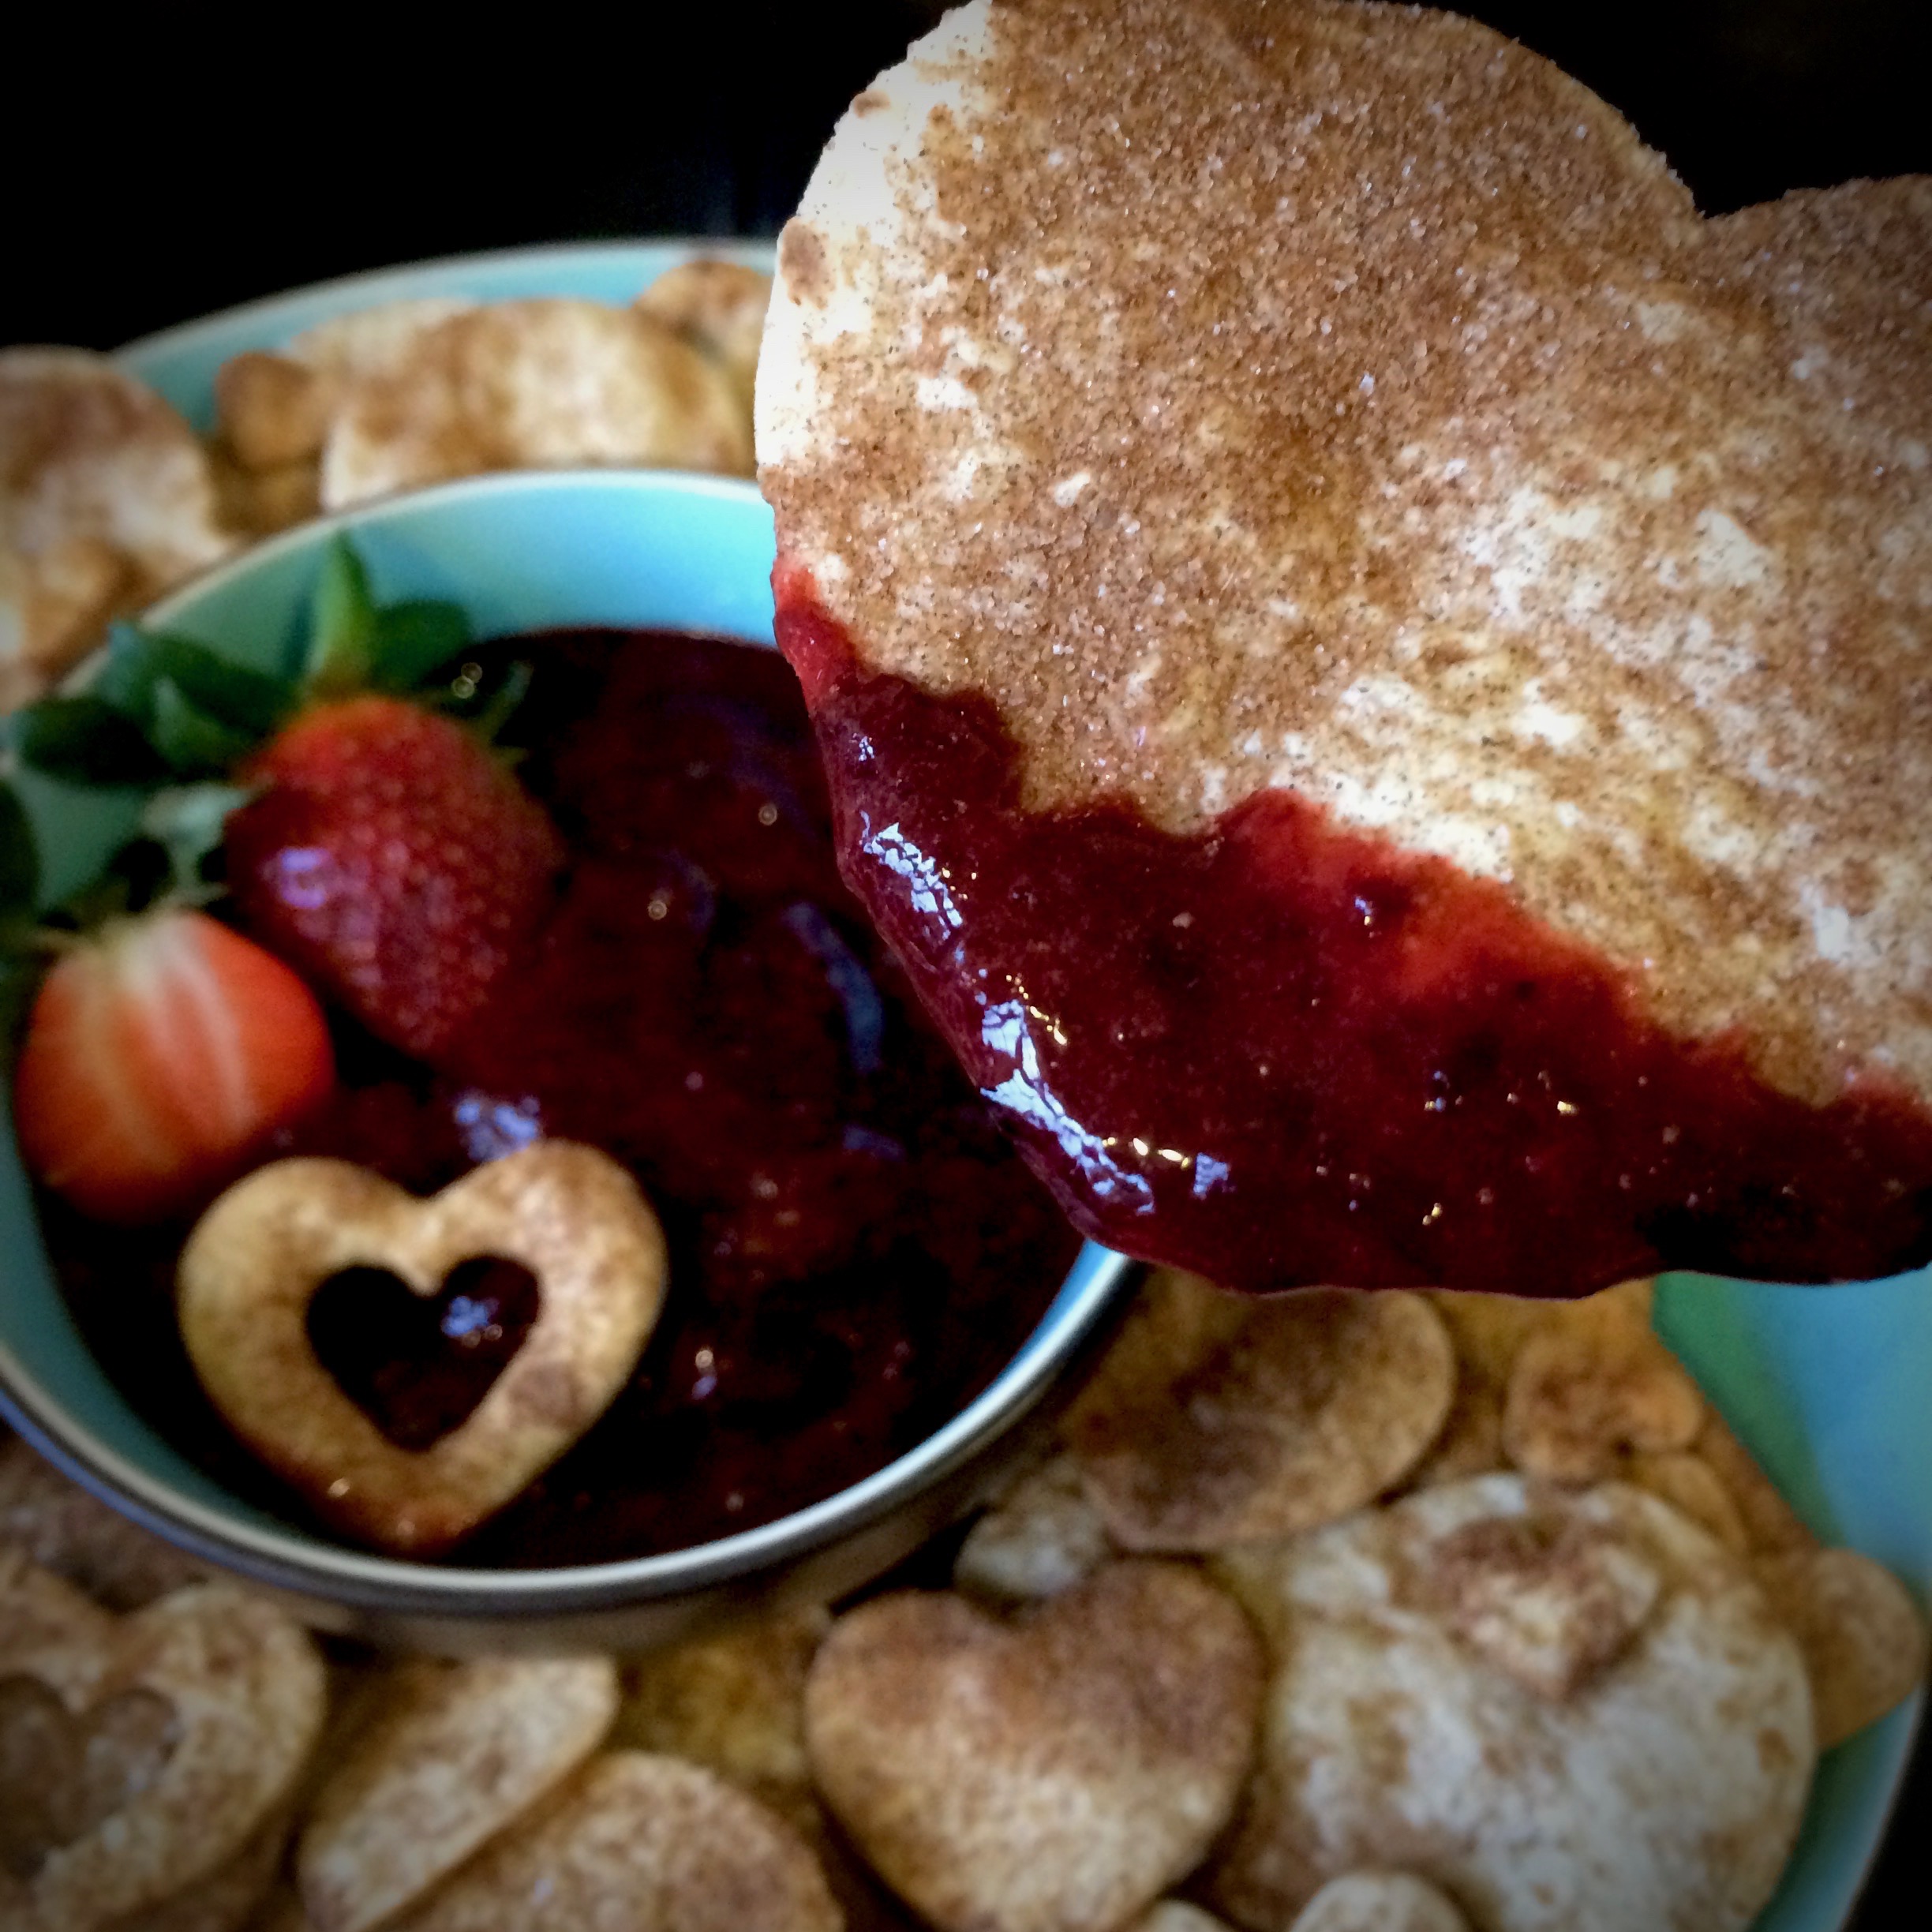 Baked Cinnamon Hearts with Sweet Cherry Dipping Sauce